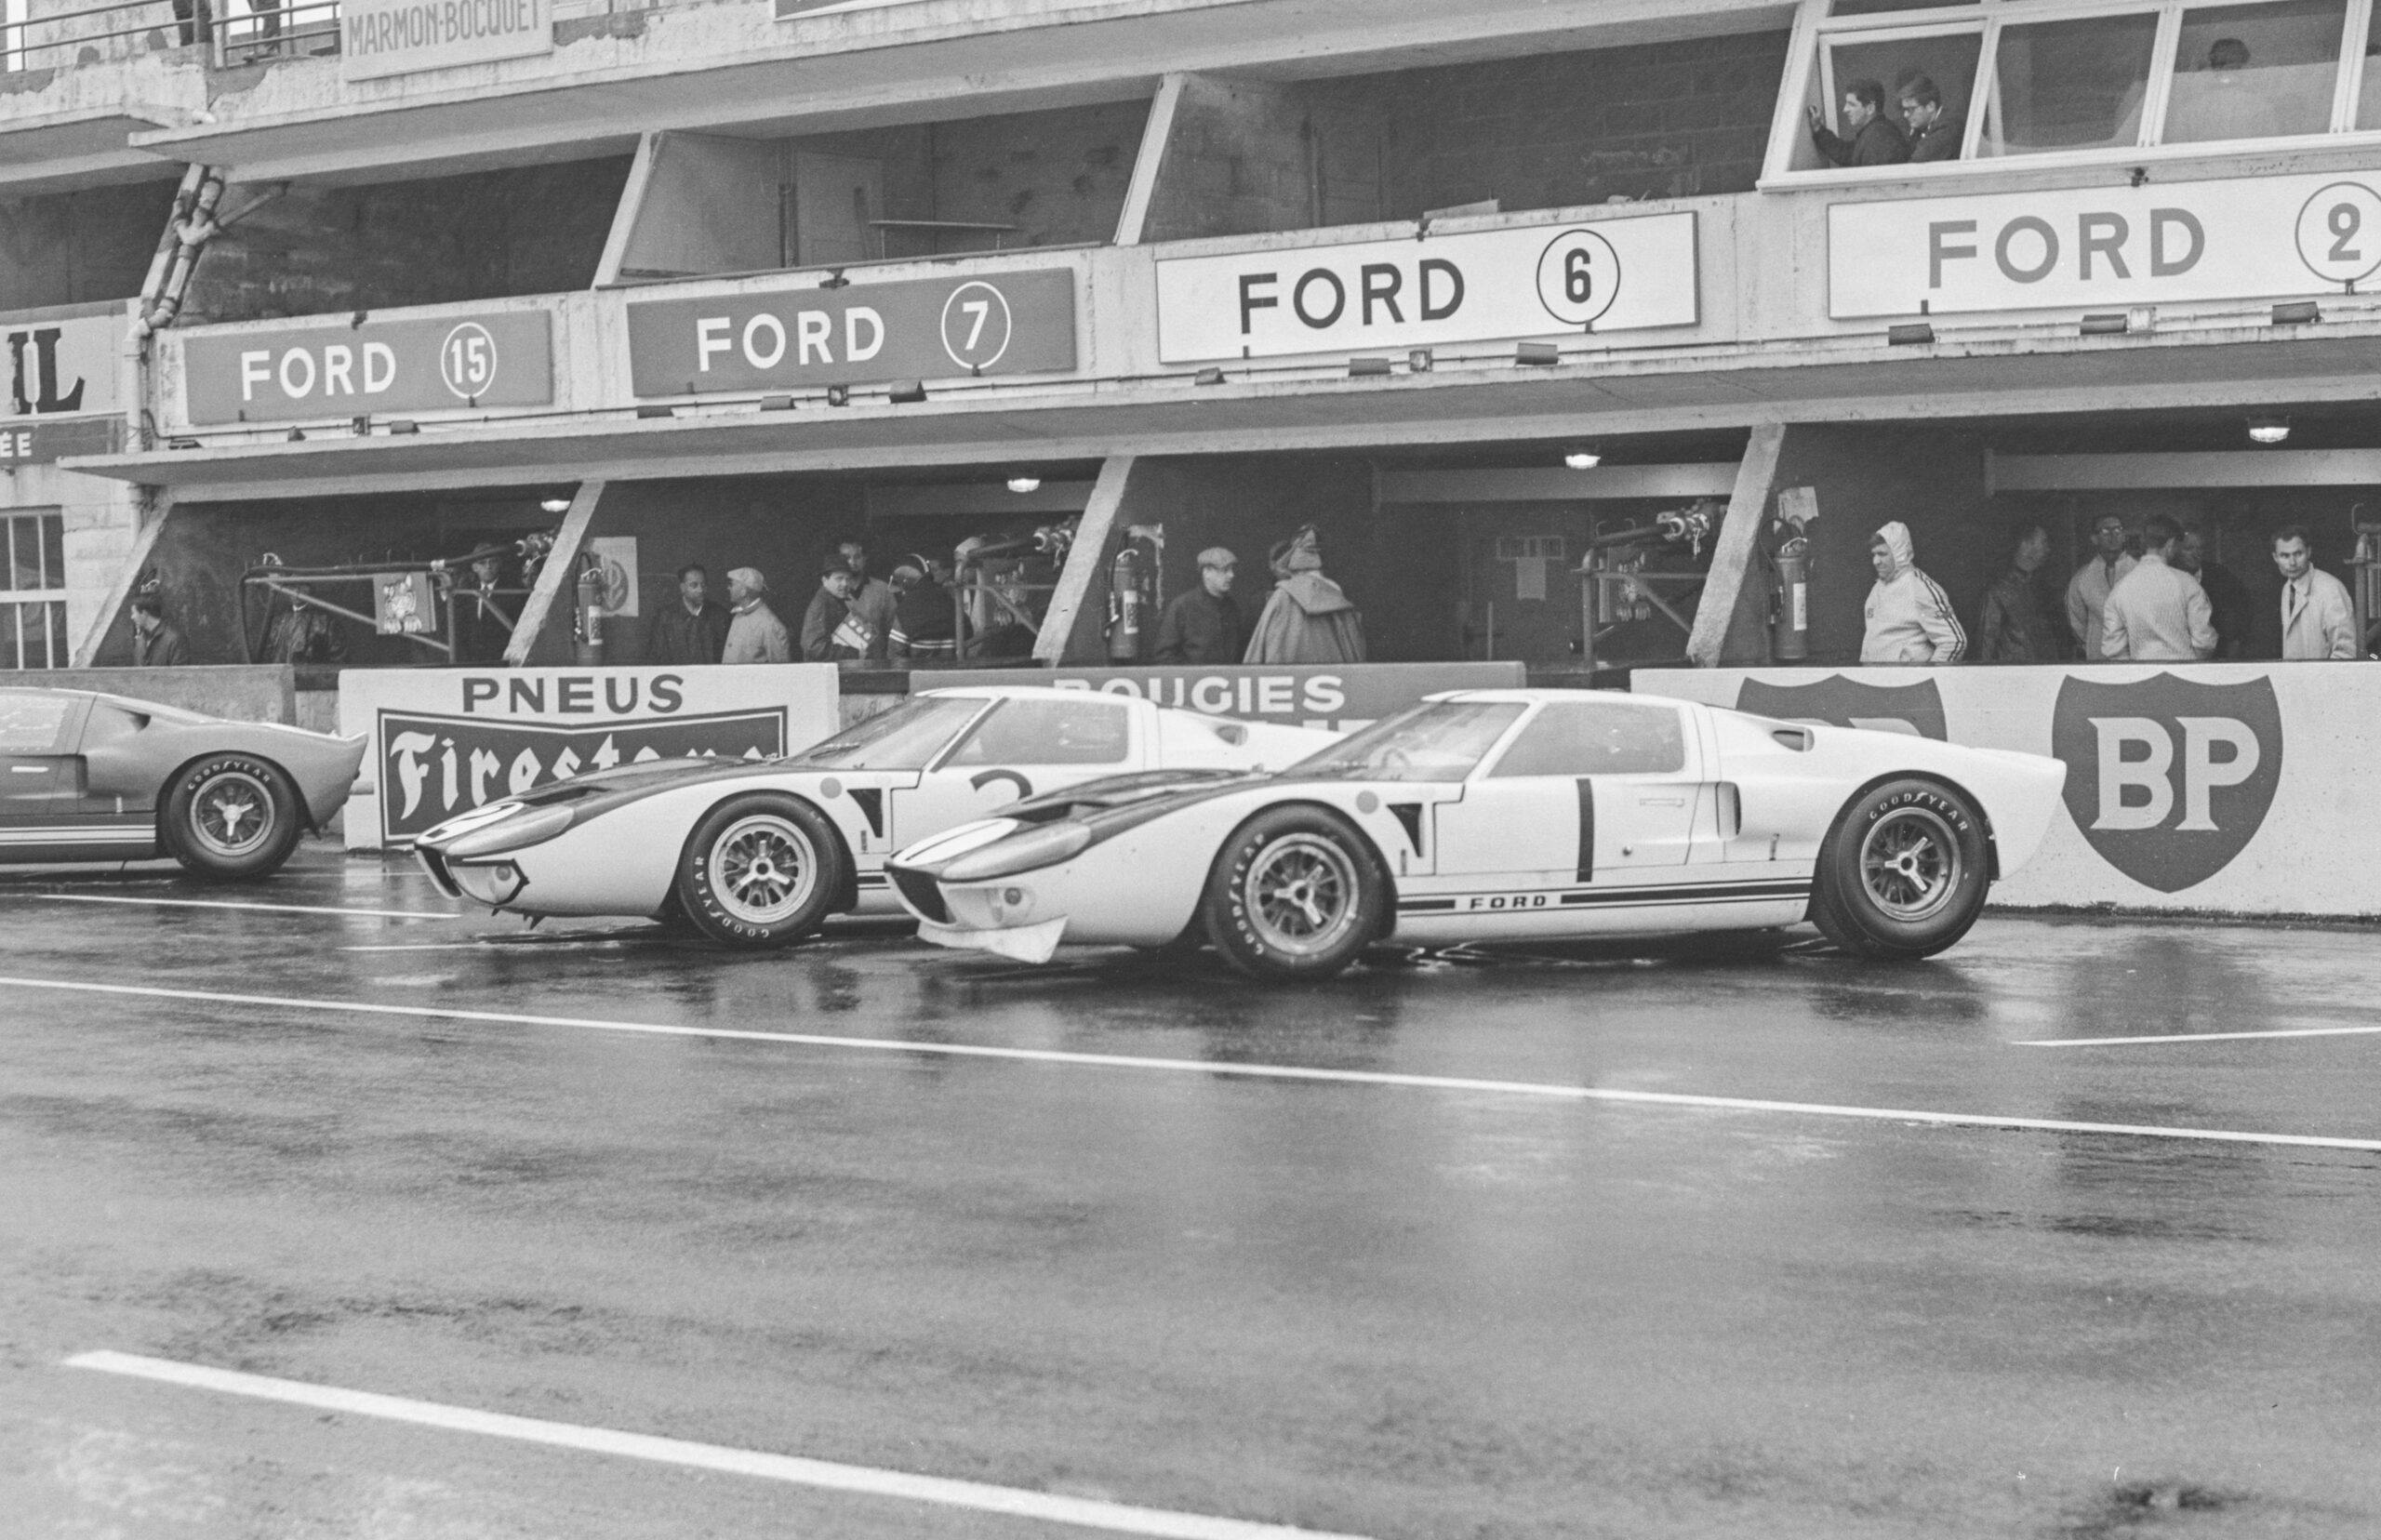 Ford GT 106 107 1965 vintage race day paddock